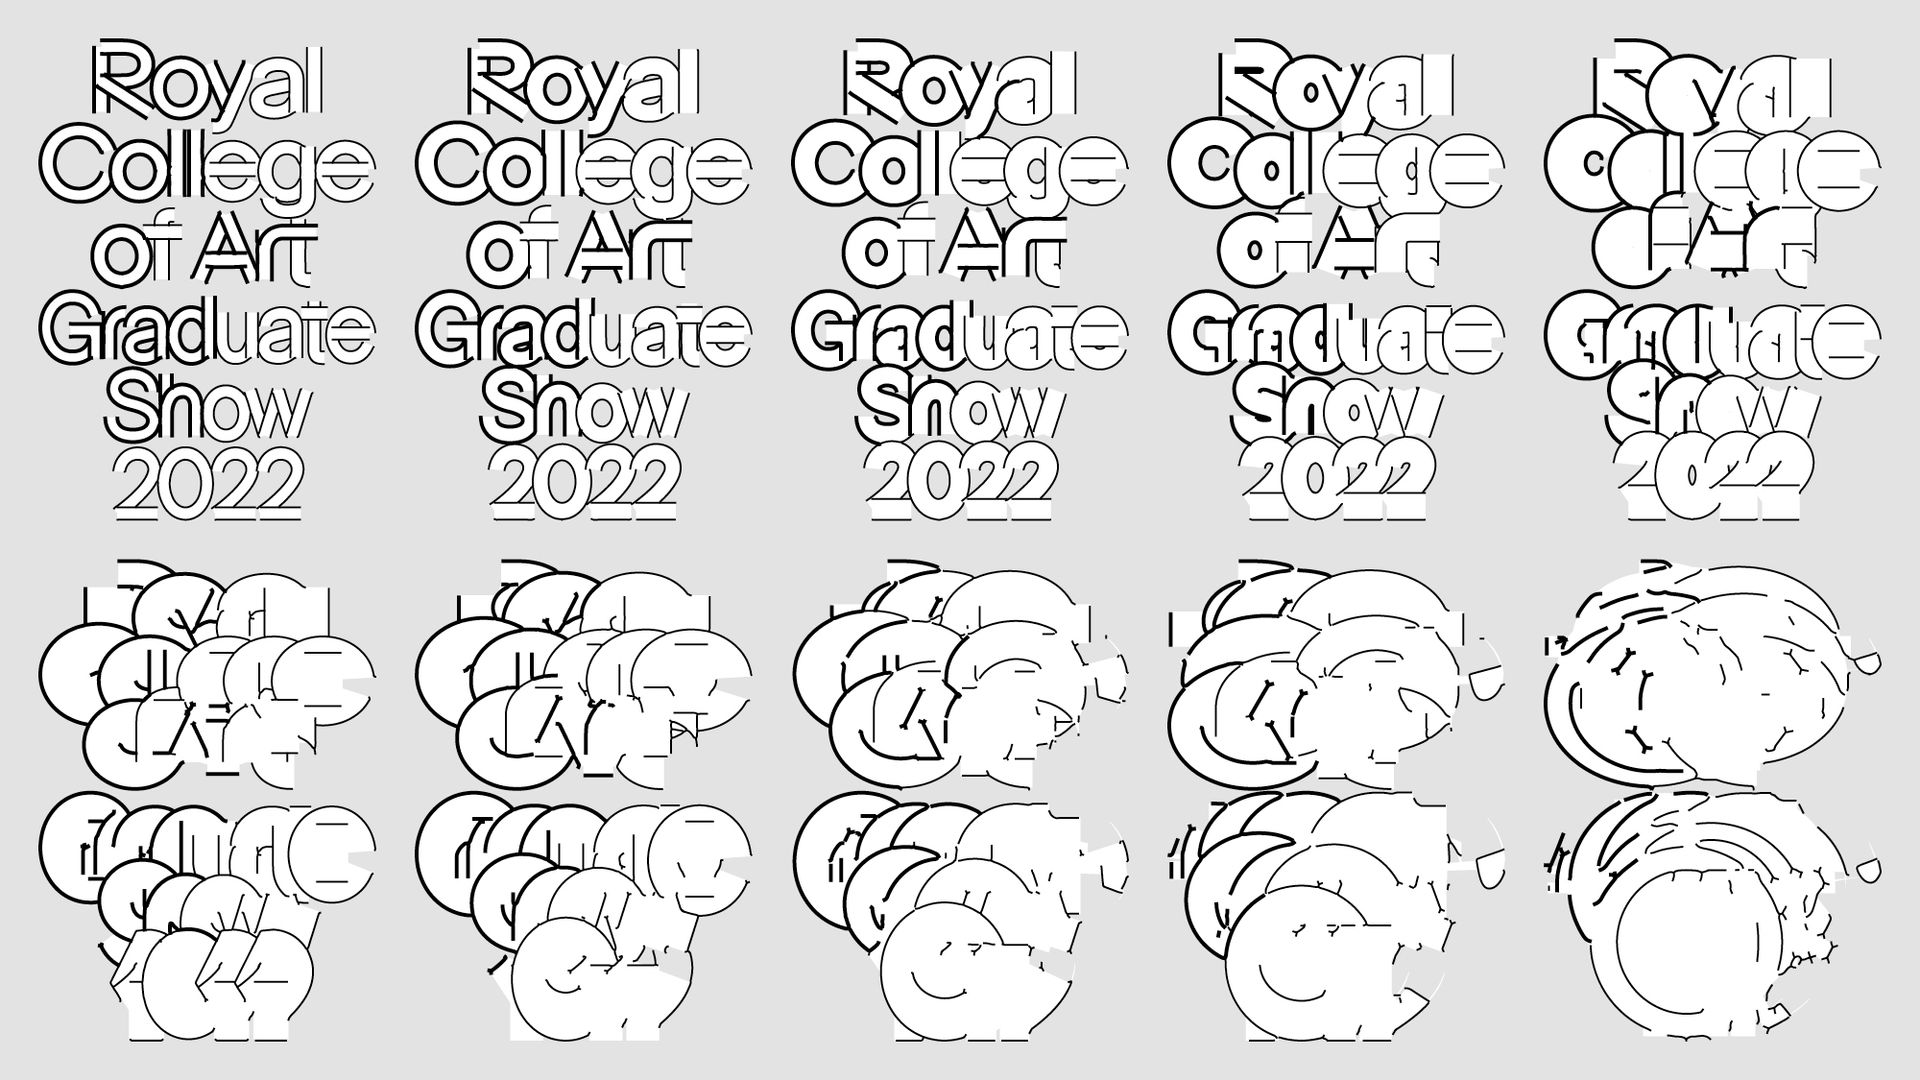 Five columns of white graphics outlined in black on a light grey background, organised into two rows. The top row shows text growing more inflated and illegible, reading: ‘Royal College of Art Graduate Show 2022’. The bottom row continues this even further, blowing up the type to complete illegibility to resemble a whirl or cloud.